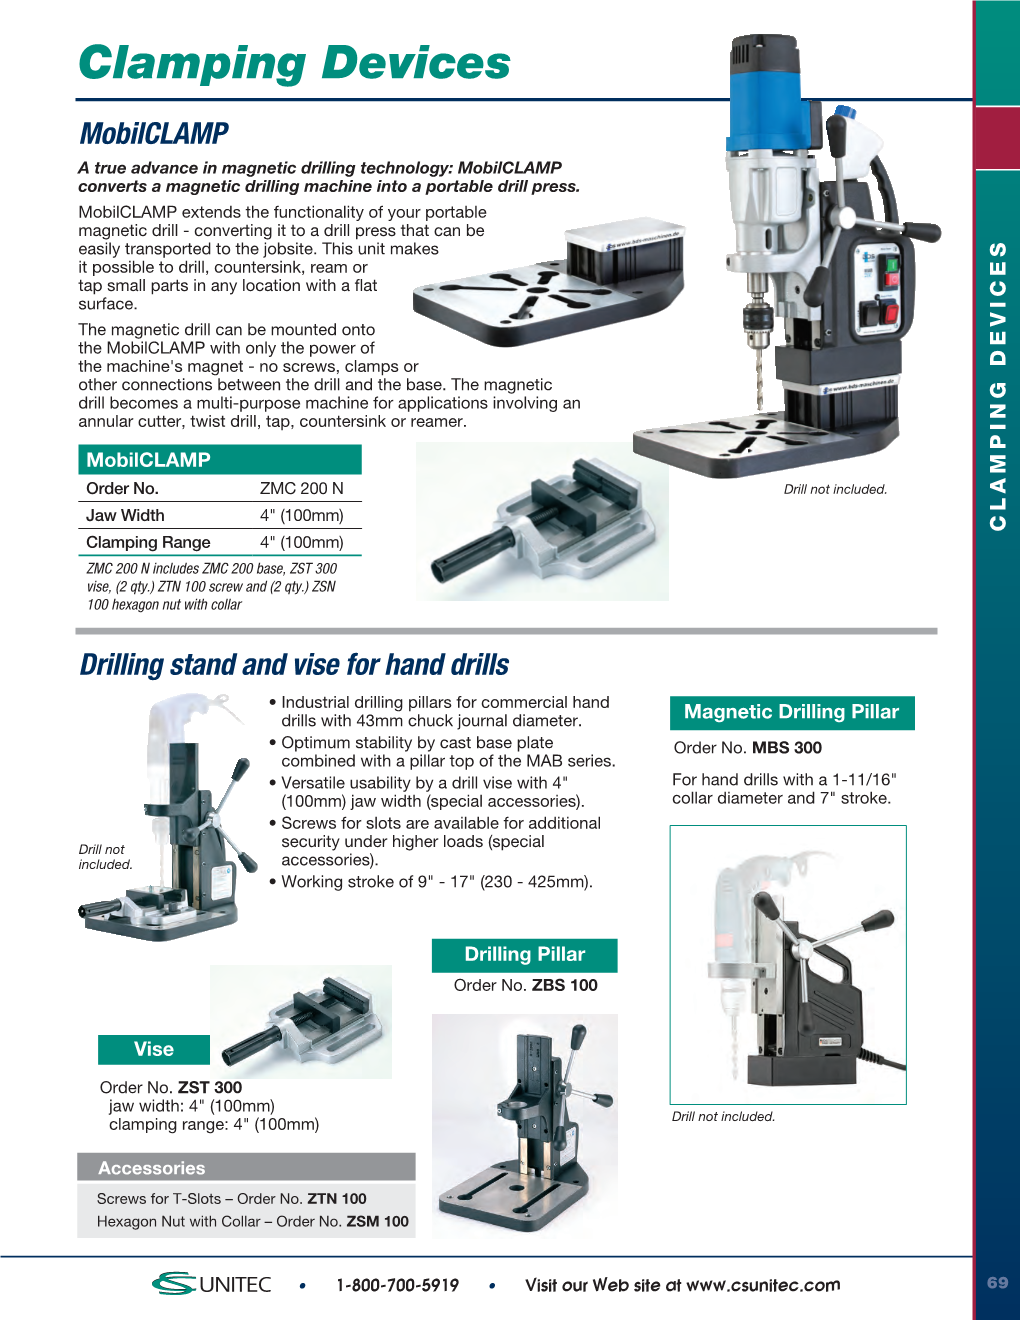 Clamps and Vacuum Plates for Portable Magnetic Drills